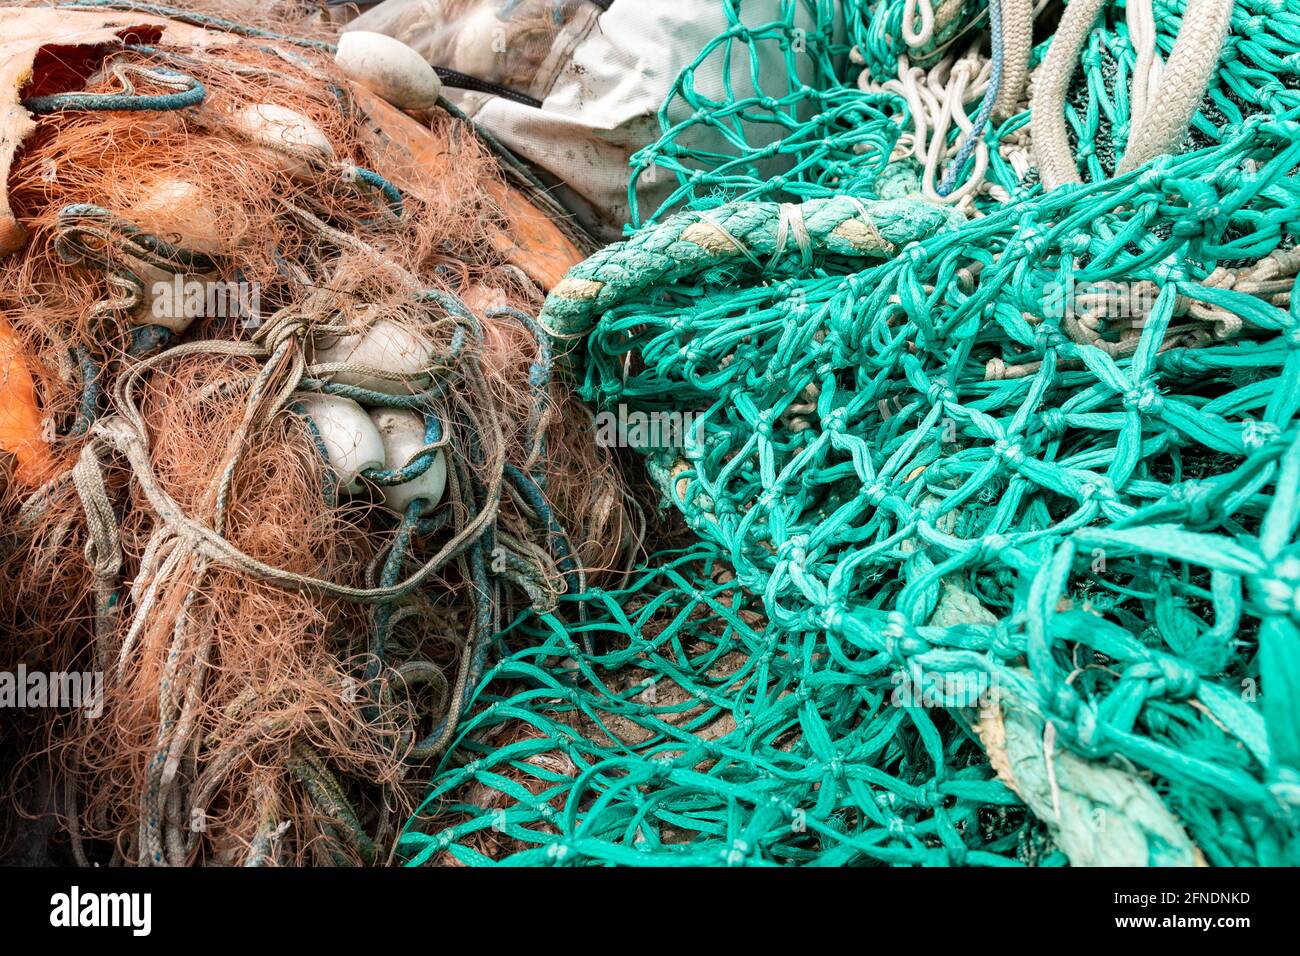 Mooring ropes and nets on a fishing boat. Accessories needed for